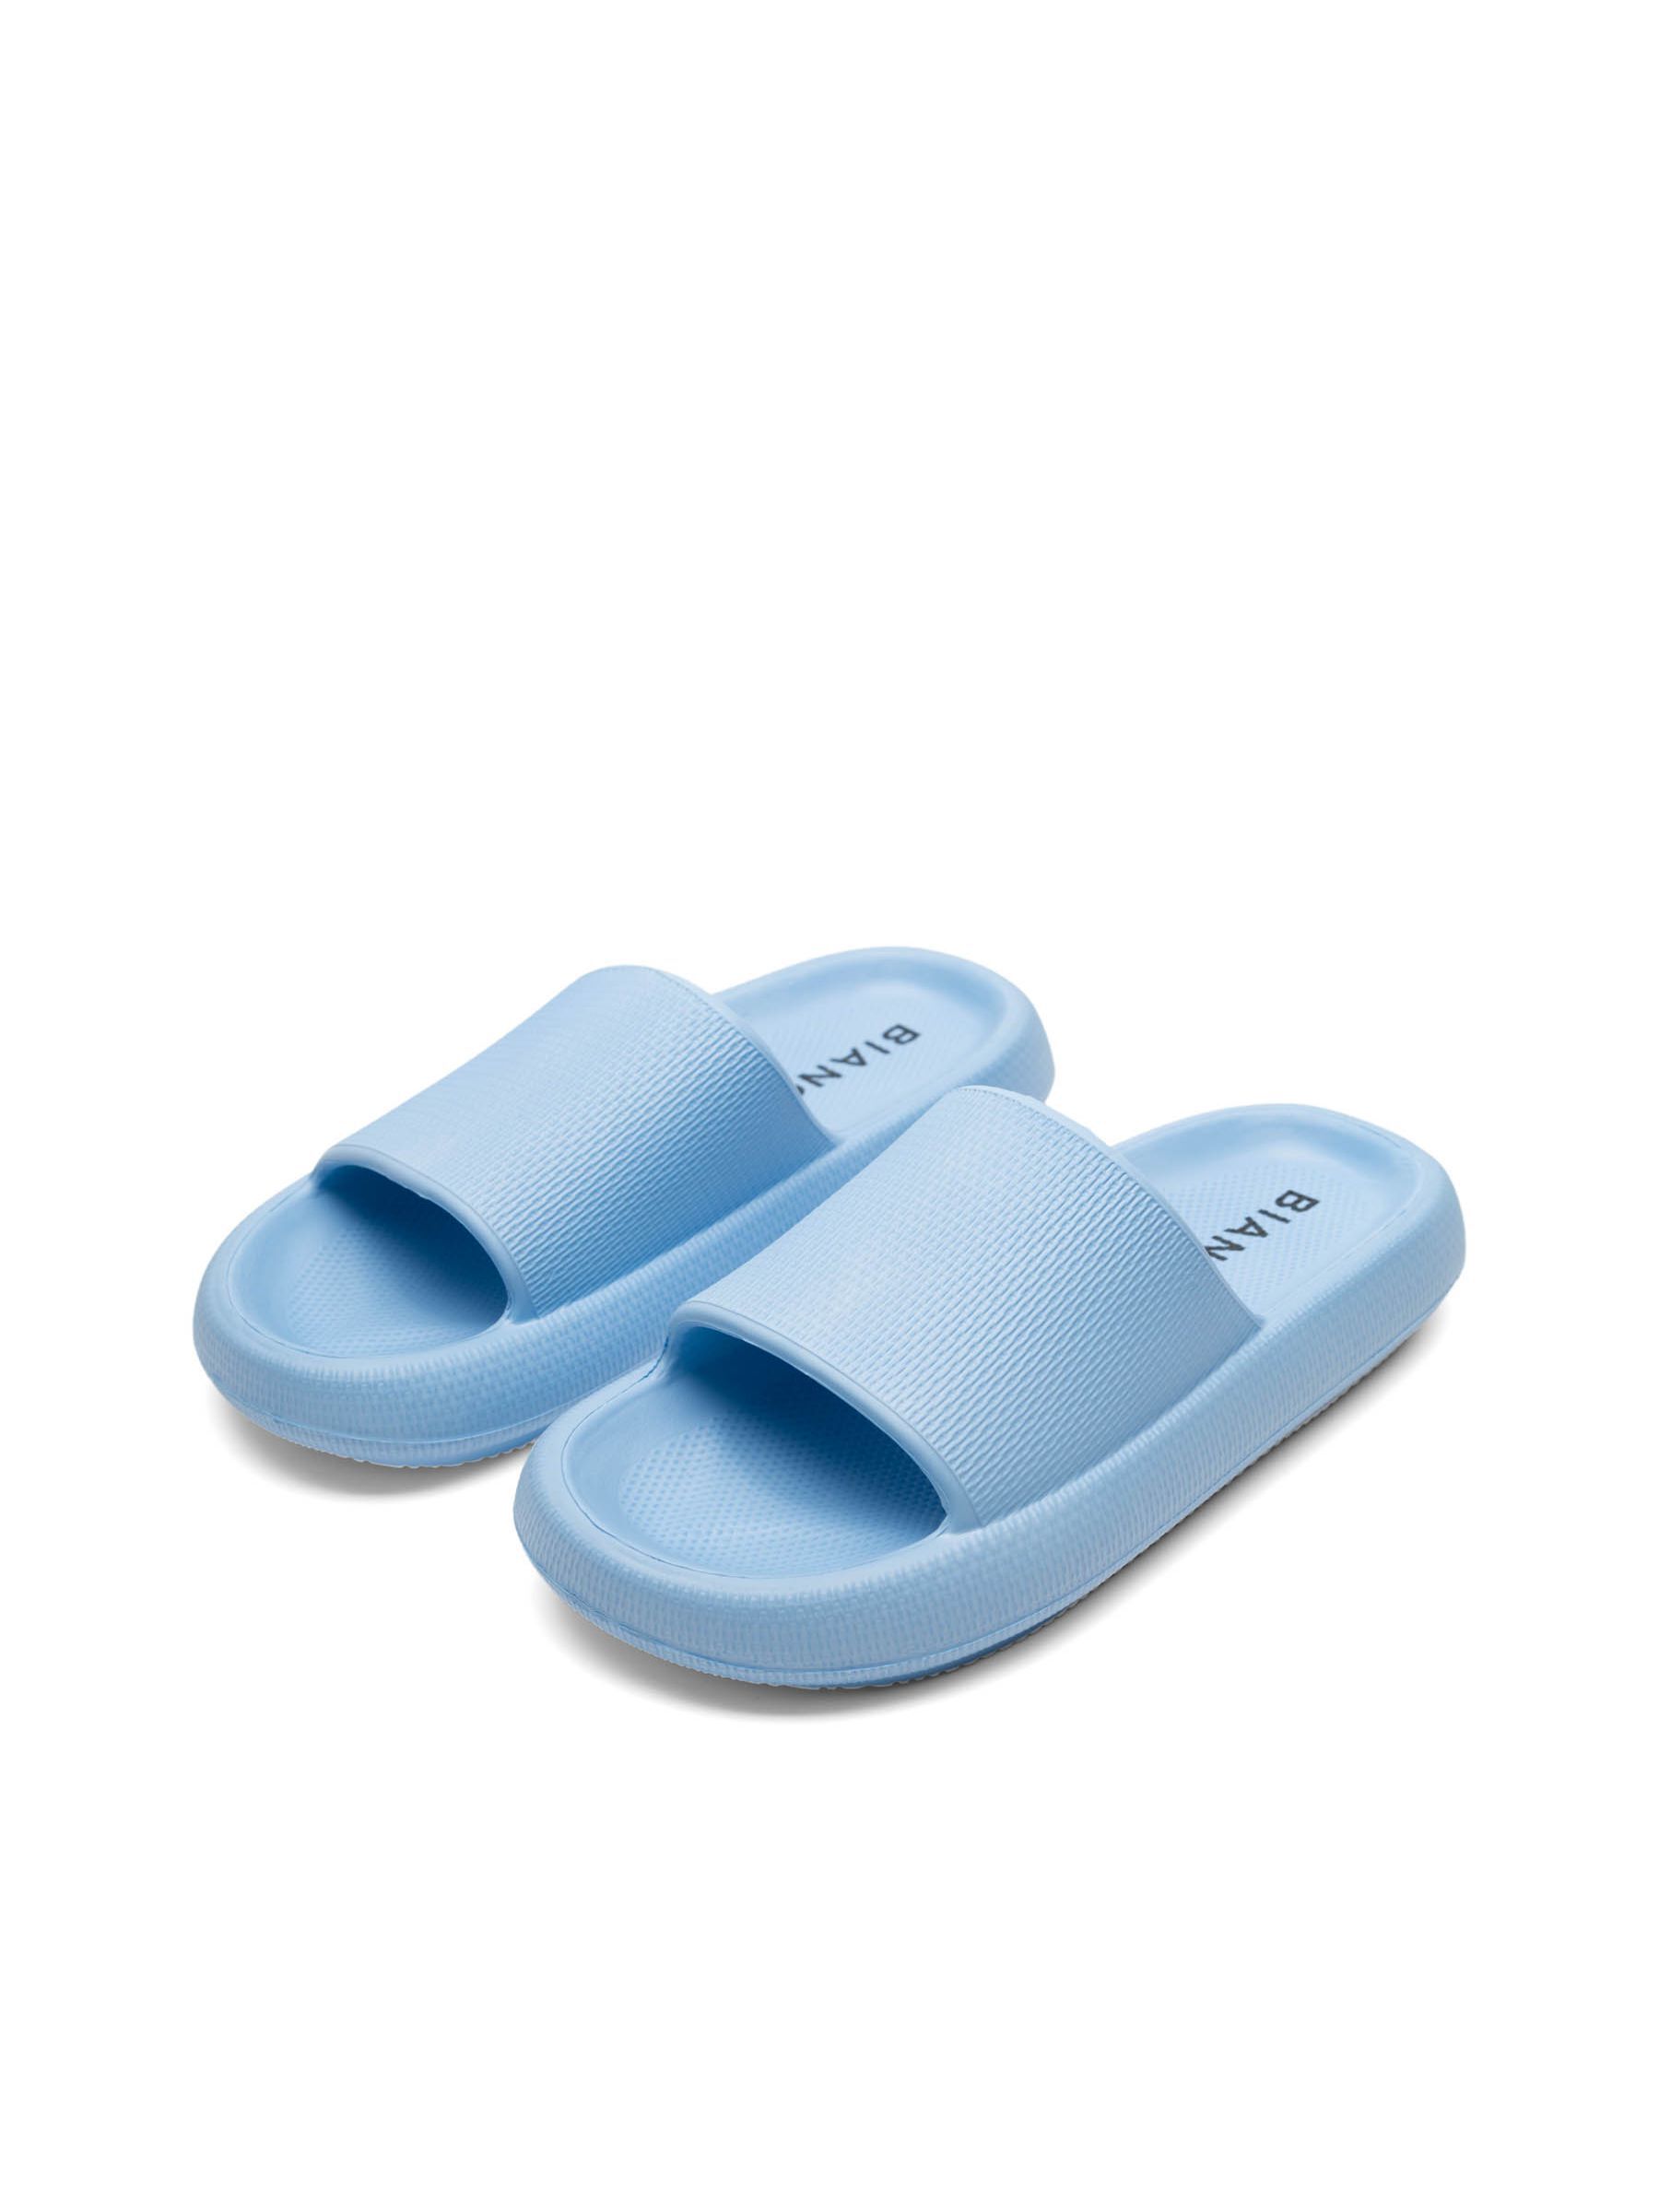 Flat woman home slippers light blue towel fabric - COMFORTABLE SLIPPERS